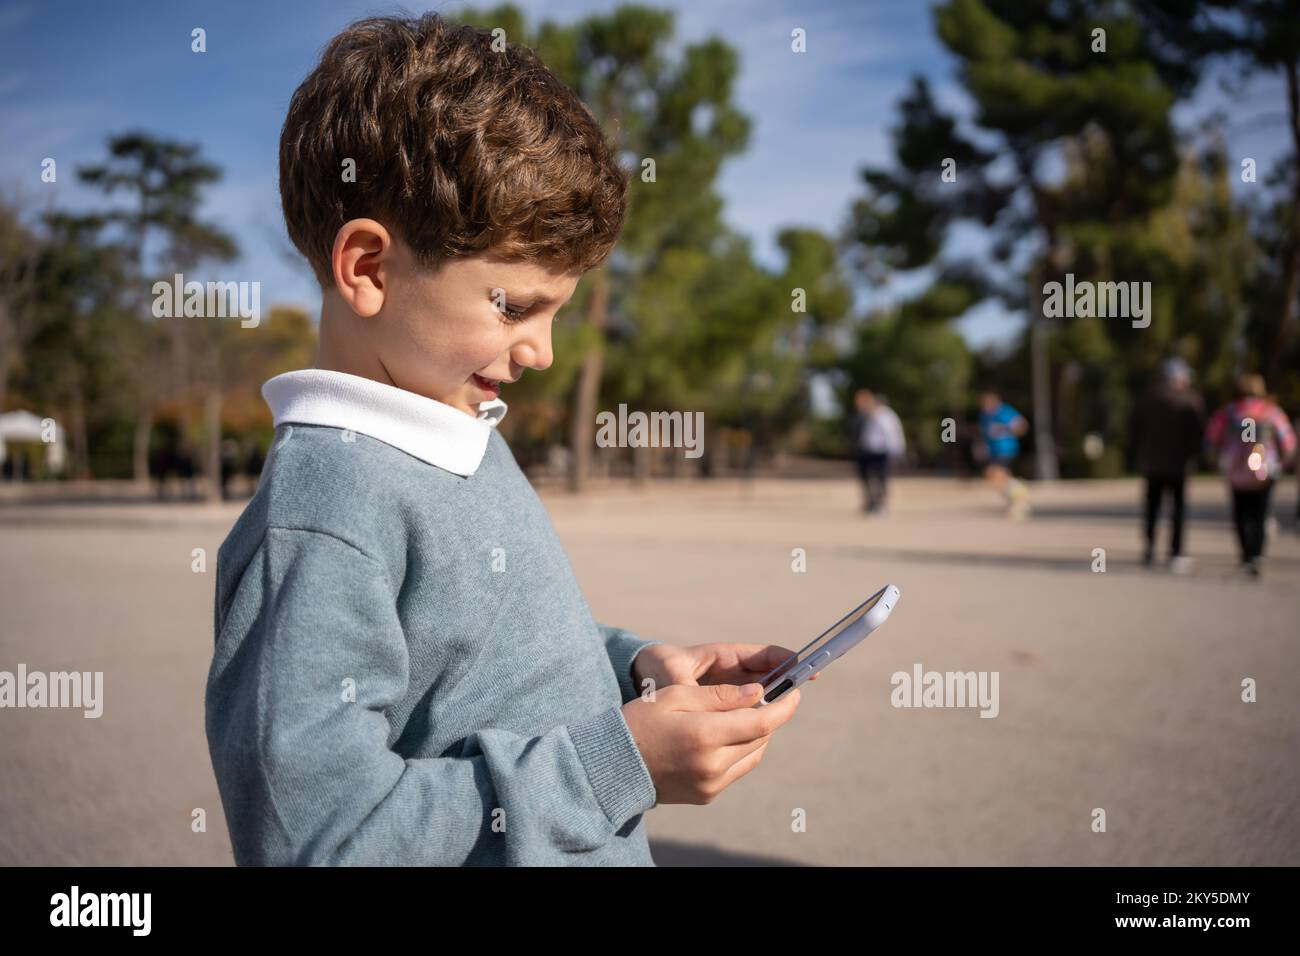 A dark-haired boy holds a smart phone as he plays quietly while standing on a street with green trees in the background Stock Photo